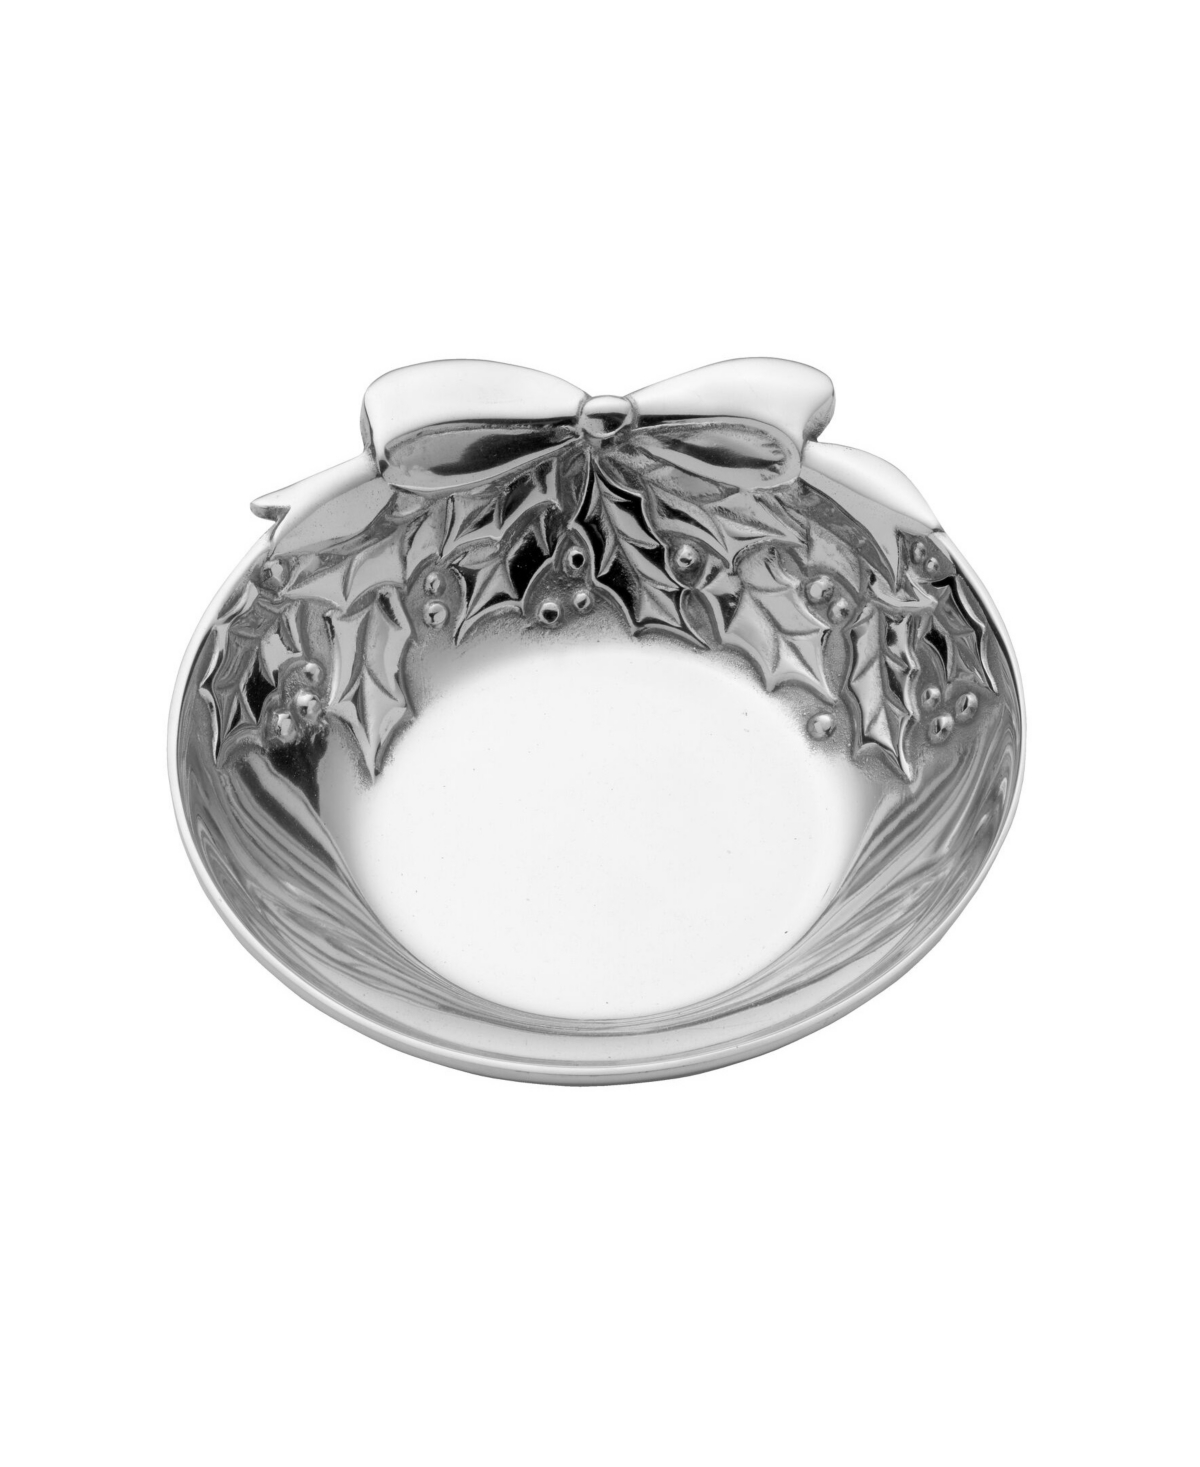 Wilton Armetale Holly Berries Small Bowl, 16 oz In Silver